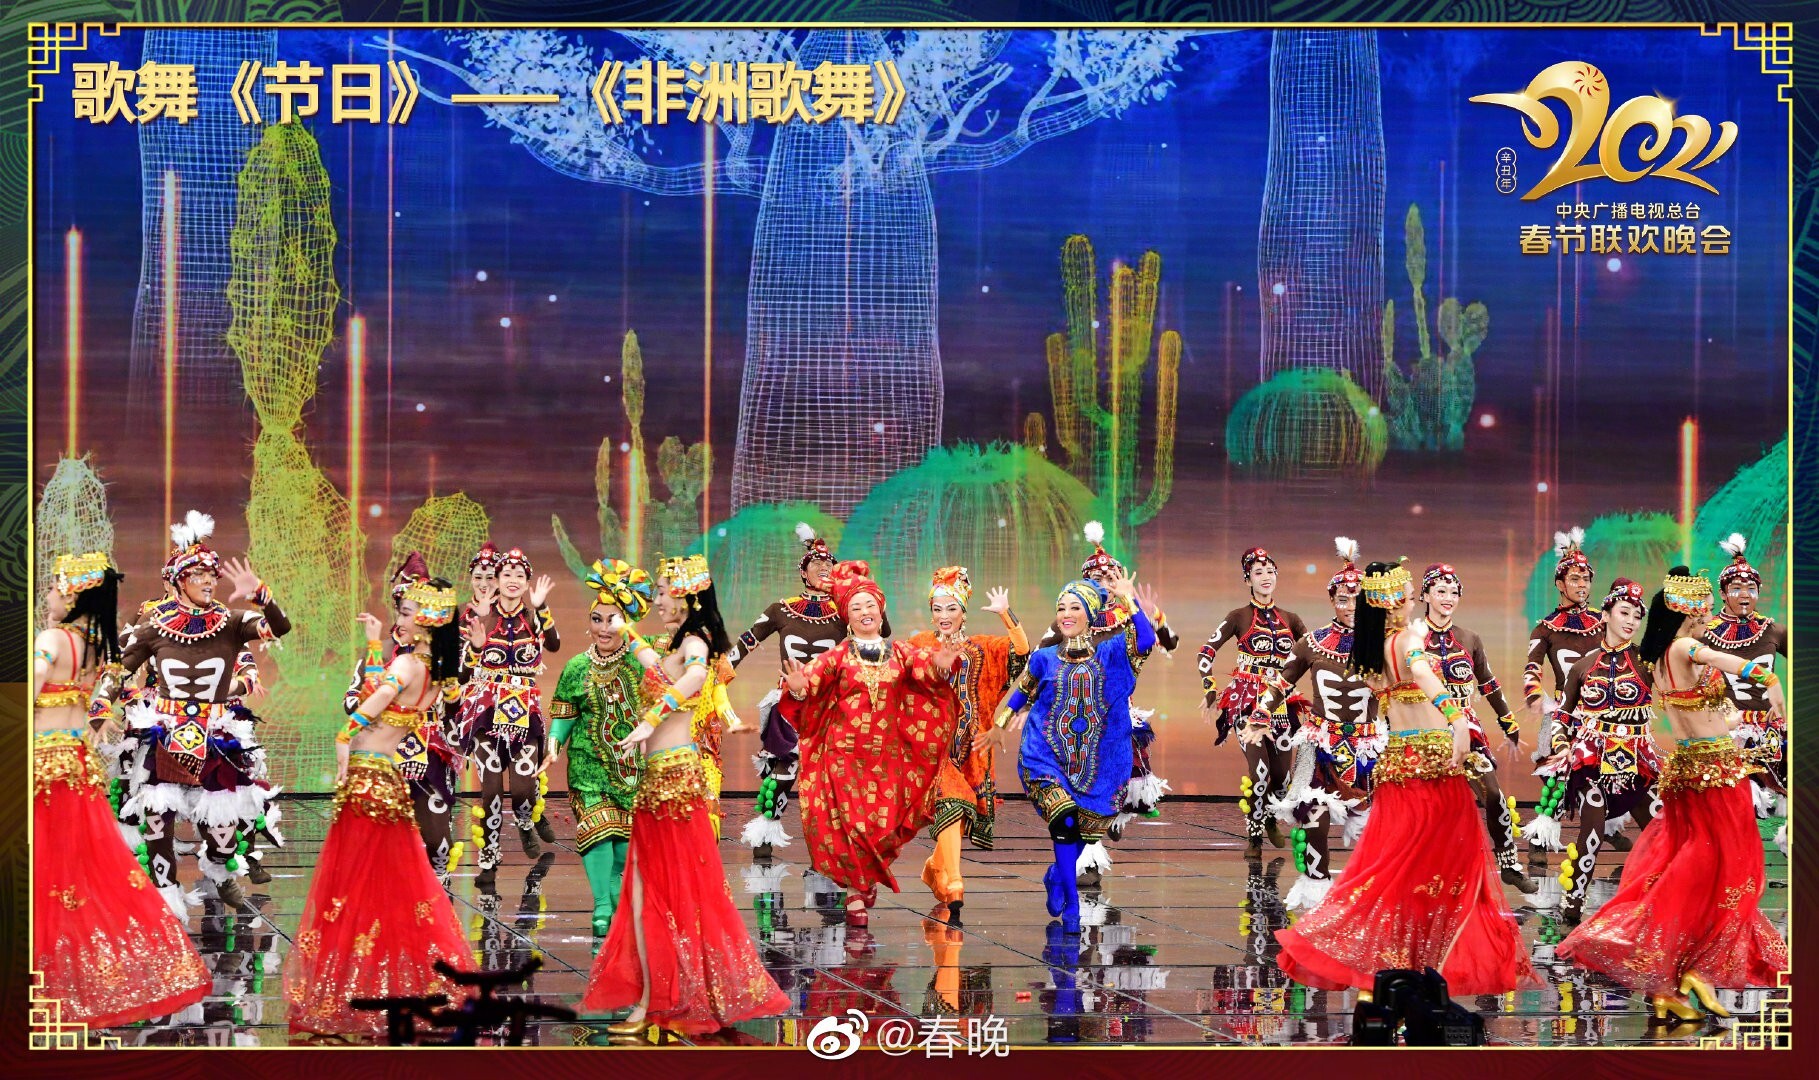 An opening dance performance during China’s biggest Lunar New Year TV gala has sparked debate and criticism online for featuring Chinese dancers dressed in African clothing and their faces painted dark. Photo: ThePaper.cn